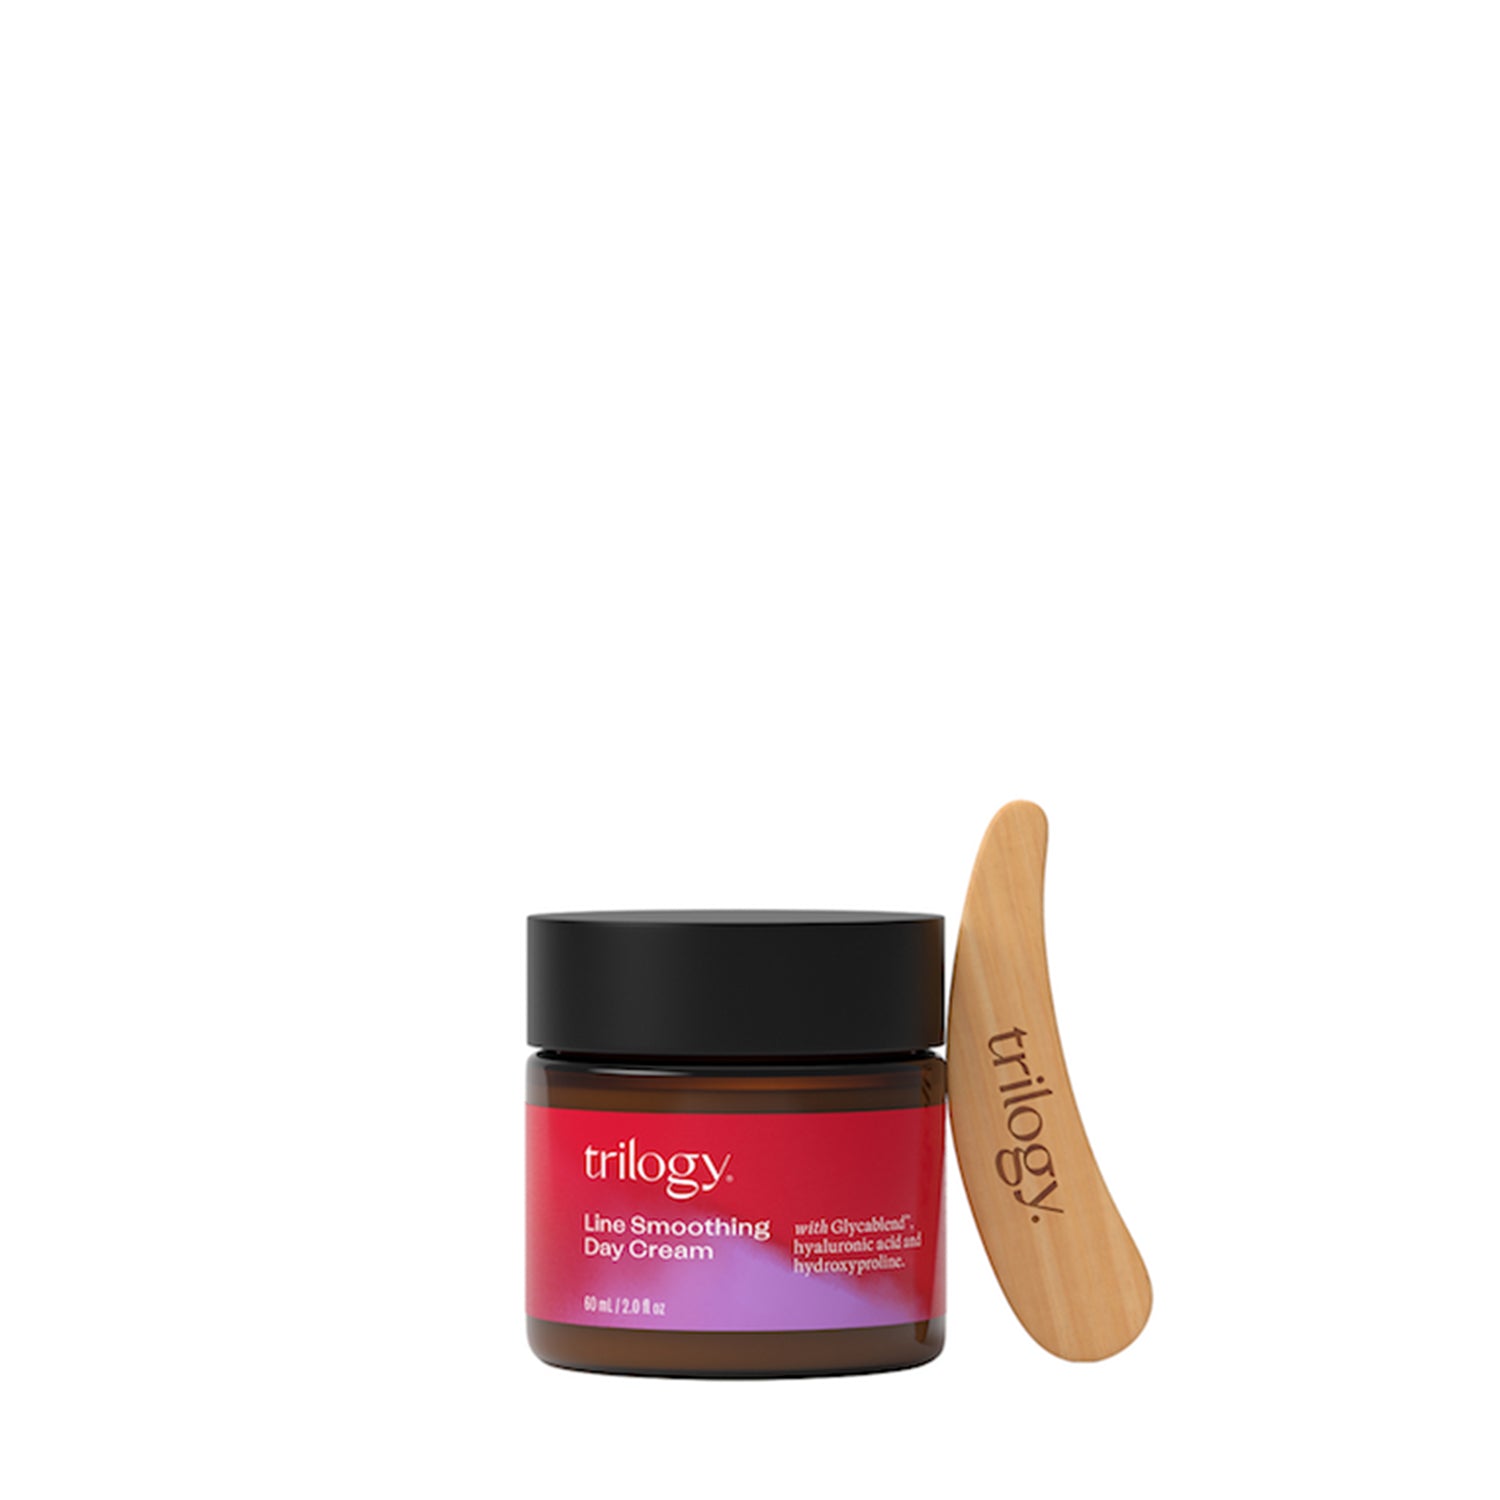 Age-Proof Line Smoothing Day Cream